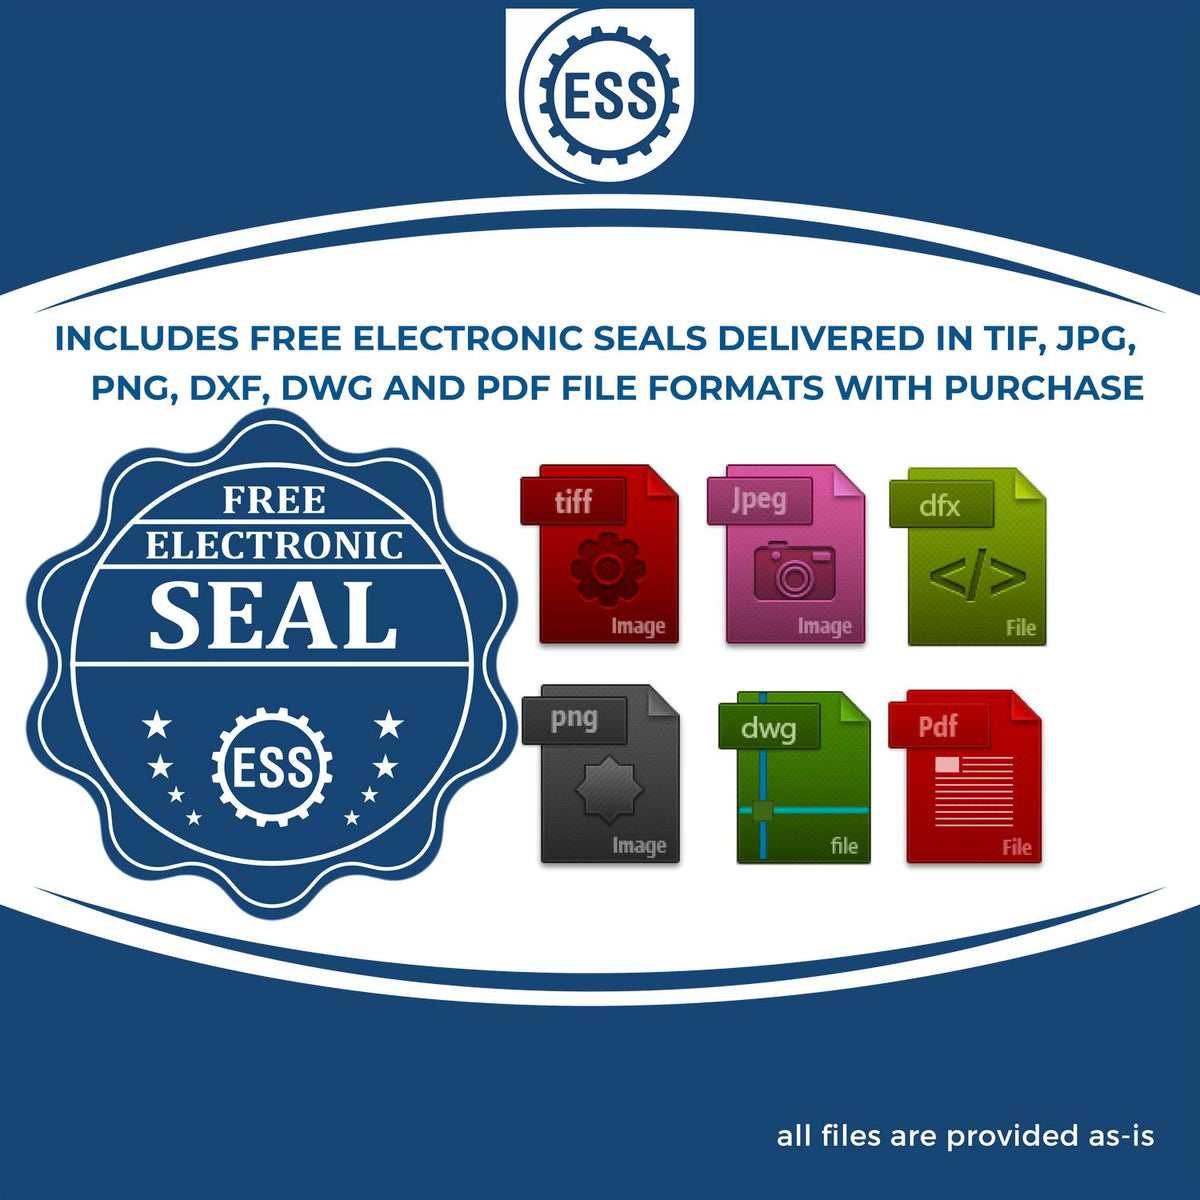 An infographic for the free electronic seal for the Long Reach Alabama Land Surveyor Seal illustrating the different file type icons such as DXF, DWG, TIF, JPG and PNG.